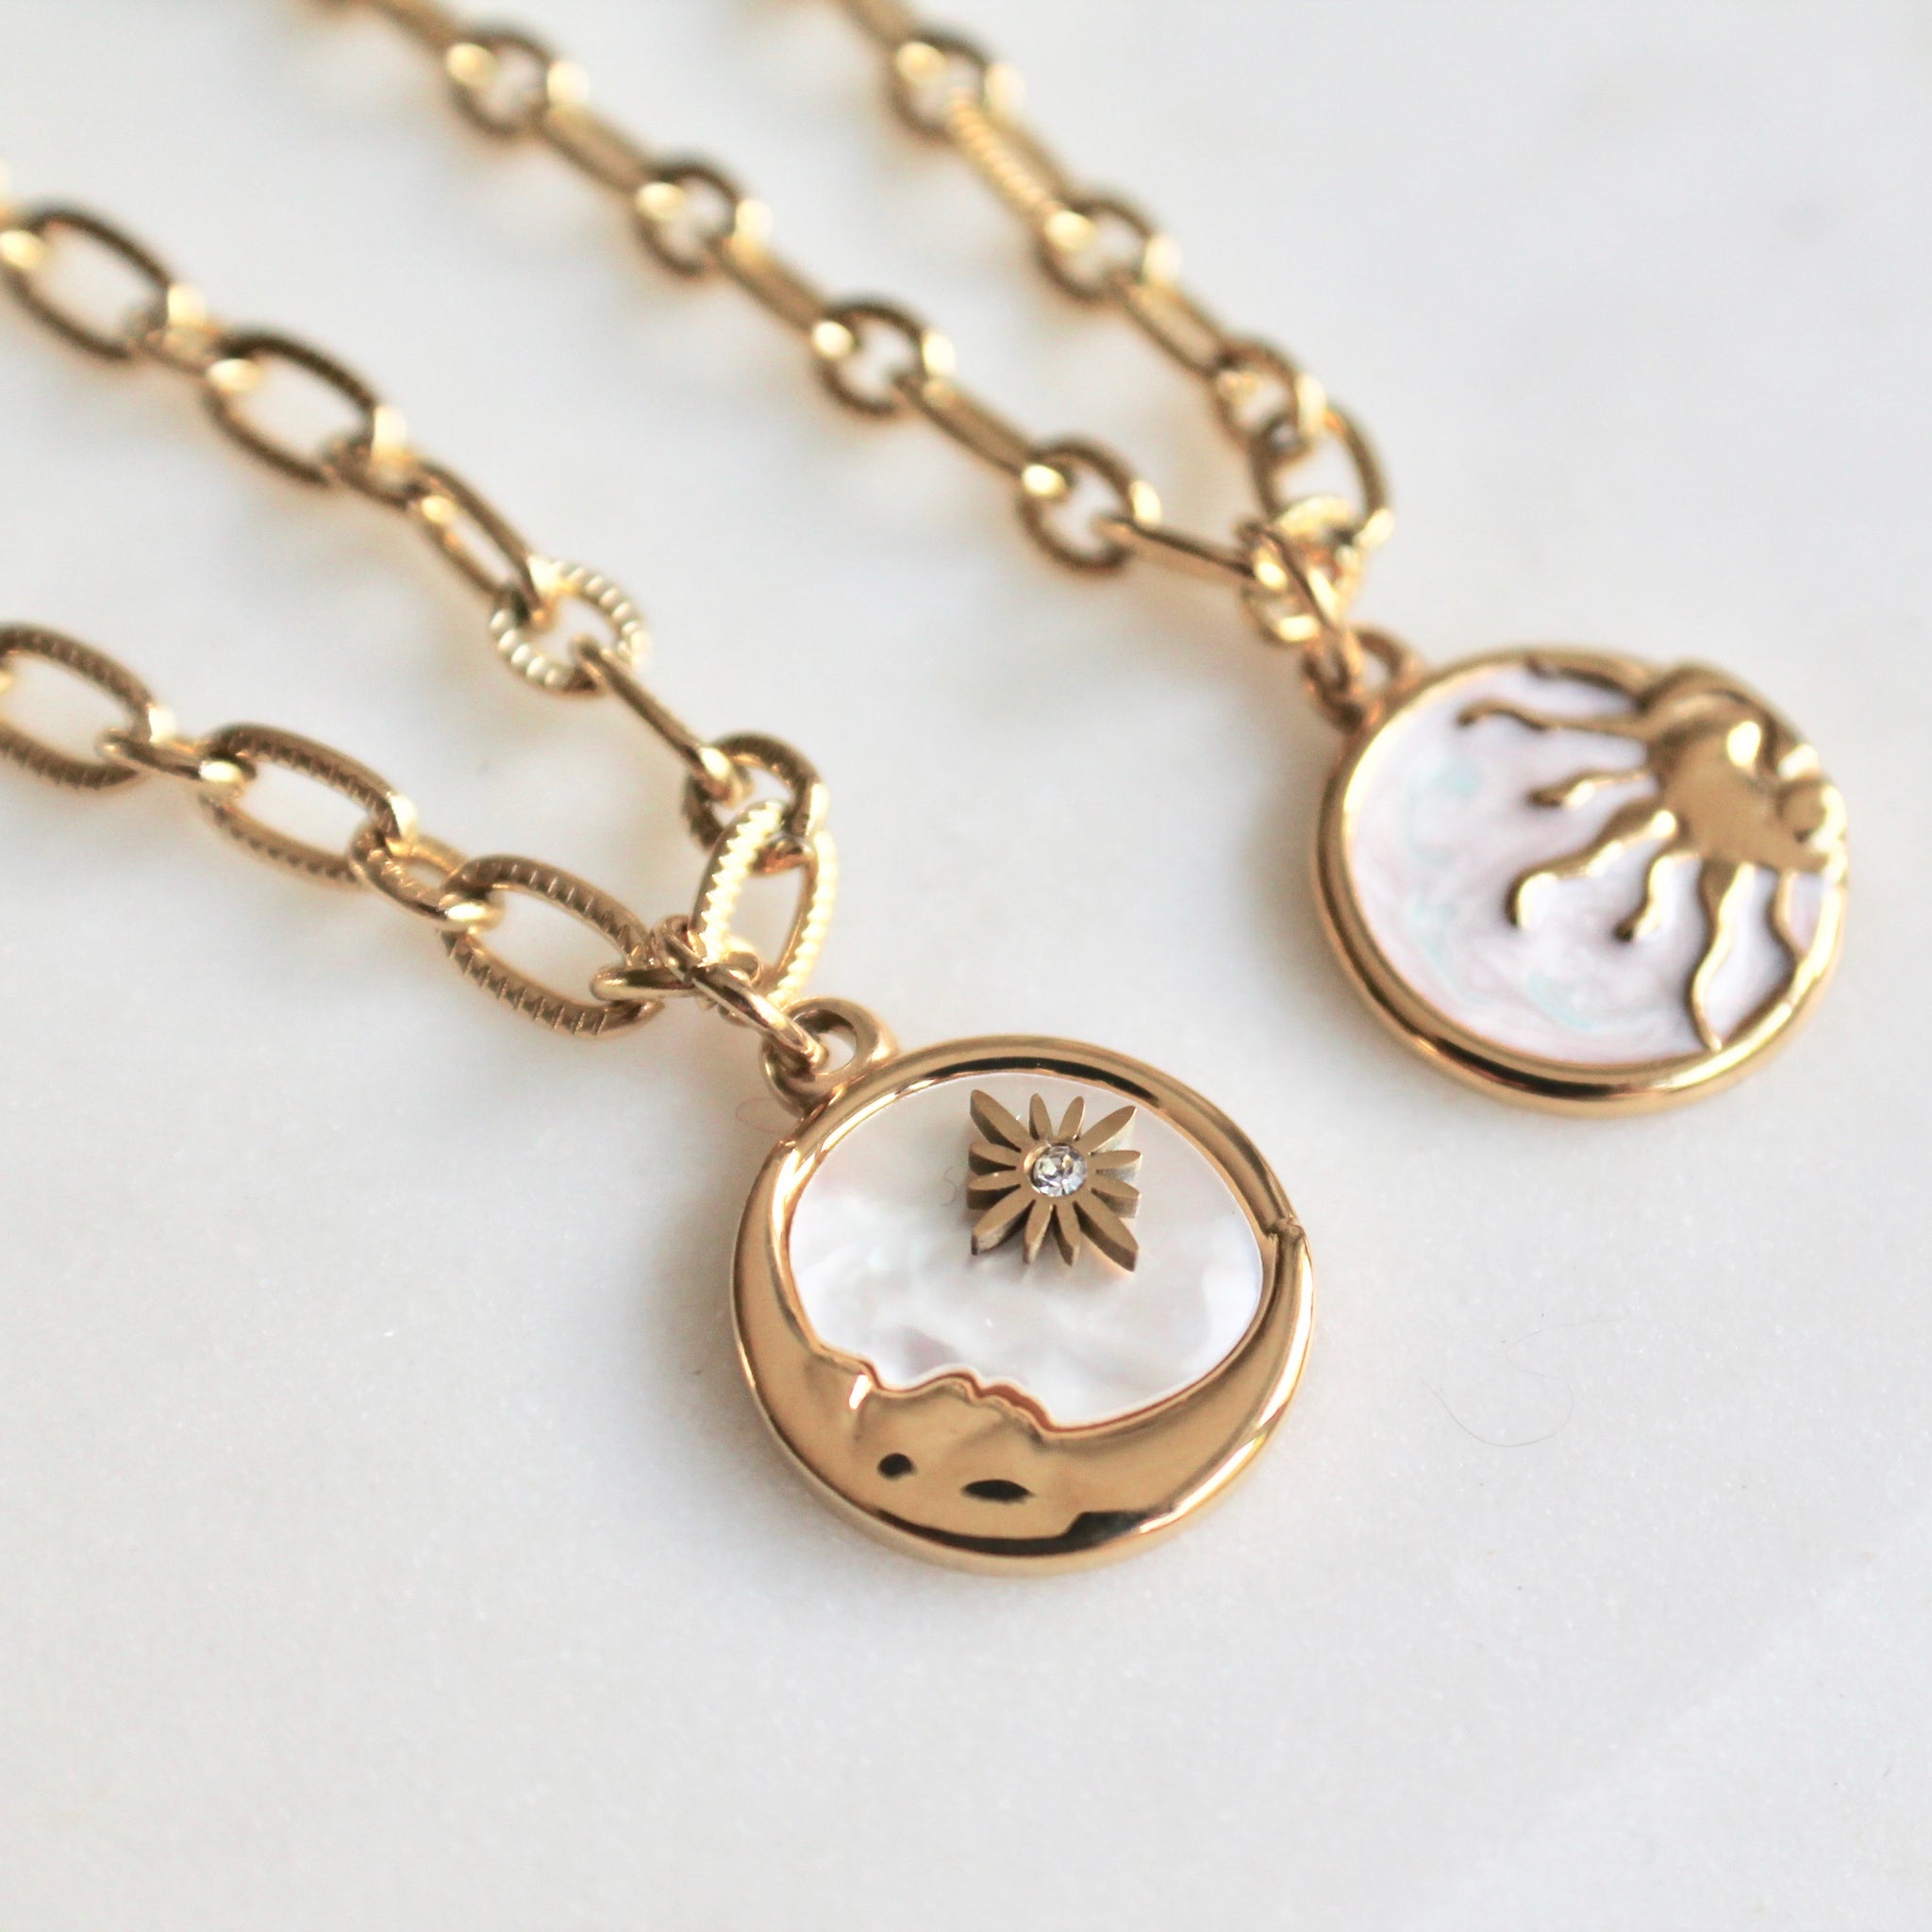 Mother of Pearl Moon and Sun necklace